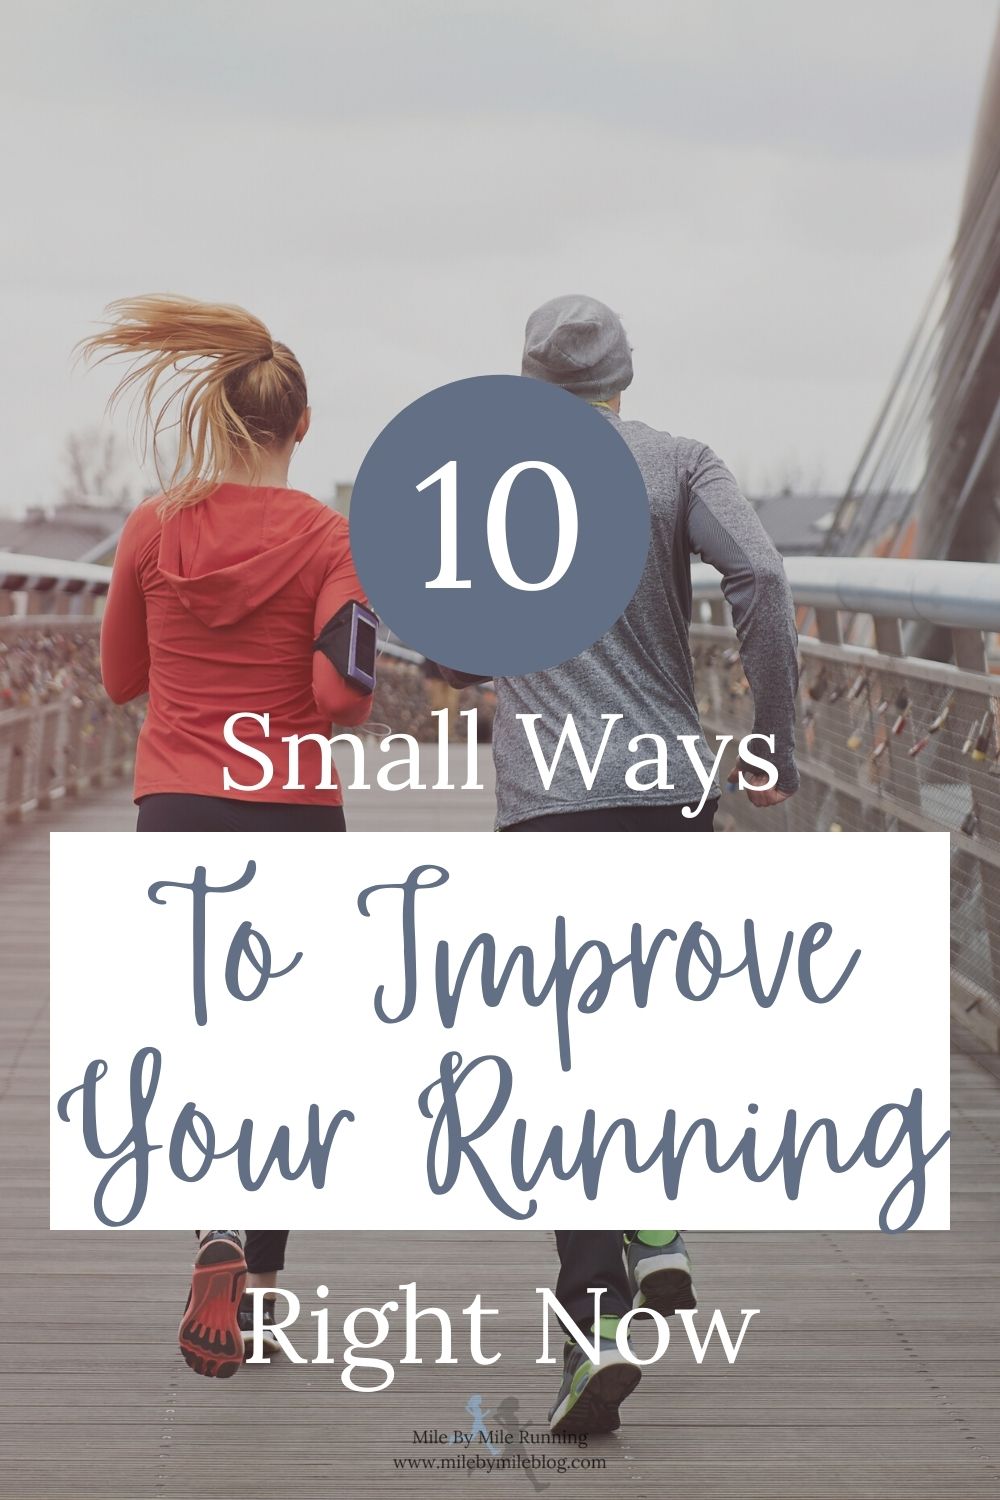 Sometimes when we think about improving our running we consider the big things, like workouts, strength training programs, and long-term goals. There are also small day-to-day changes we can make that, when done consistently, can help improve your running. Small changes add up, and can seem less intimidating than bigger ones. Check out these small ways to improve your running right now and give some of them a try!